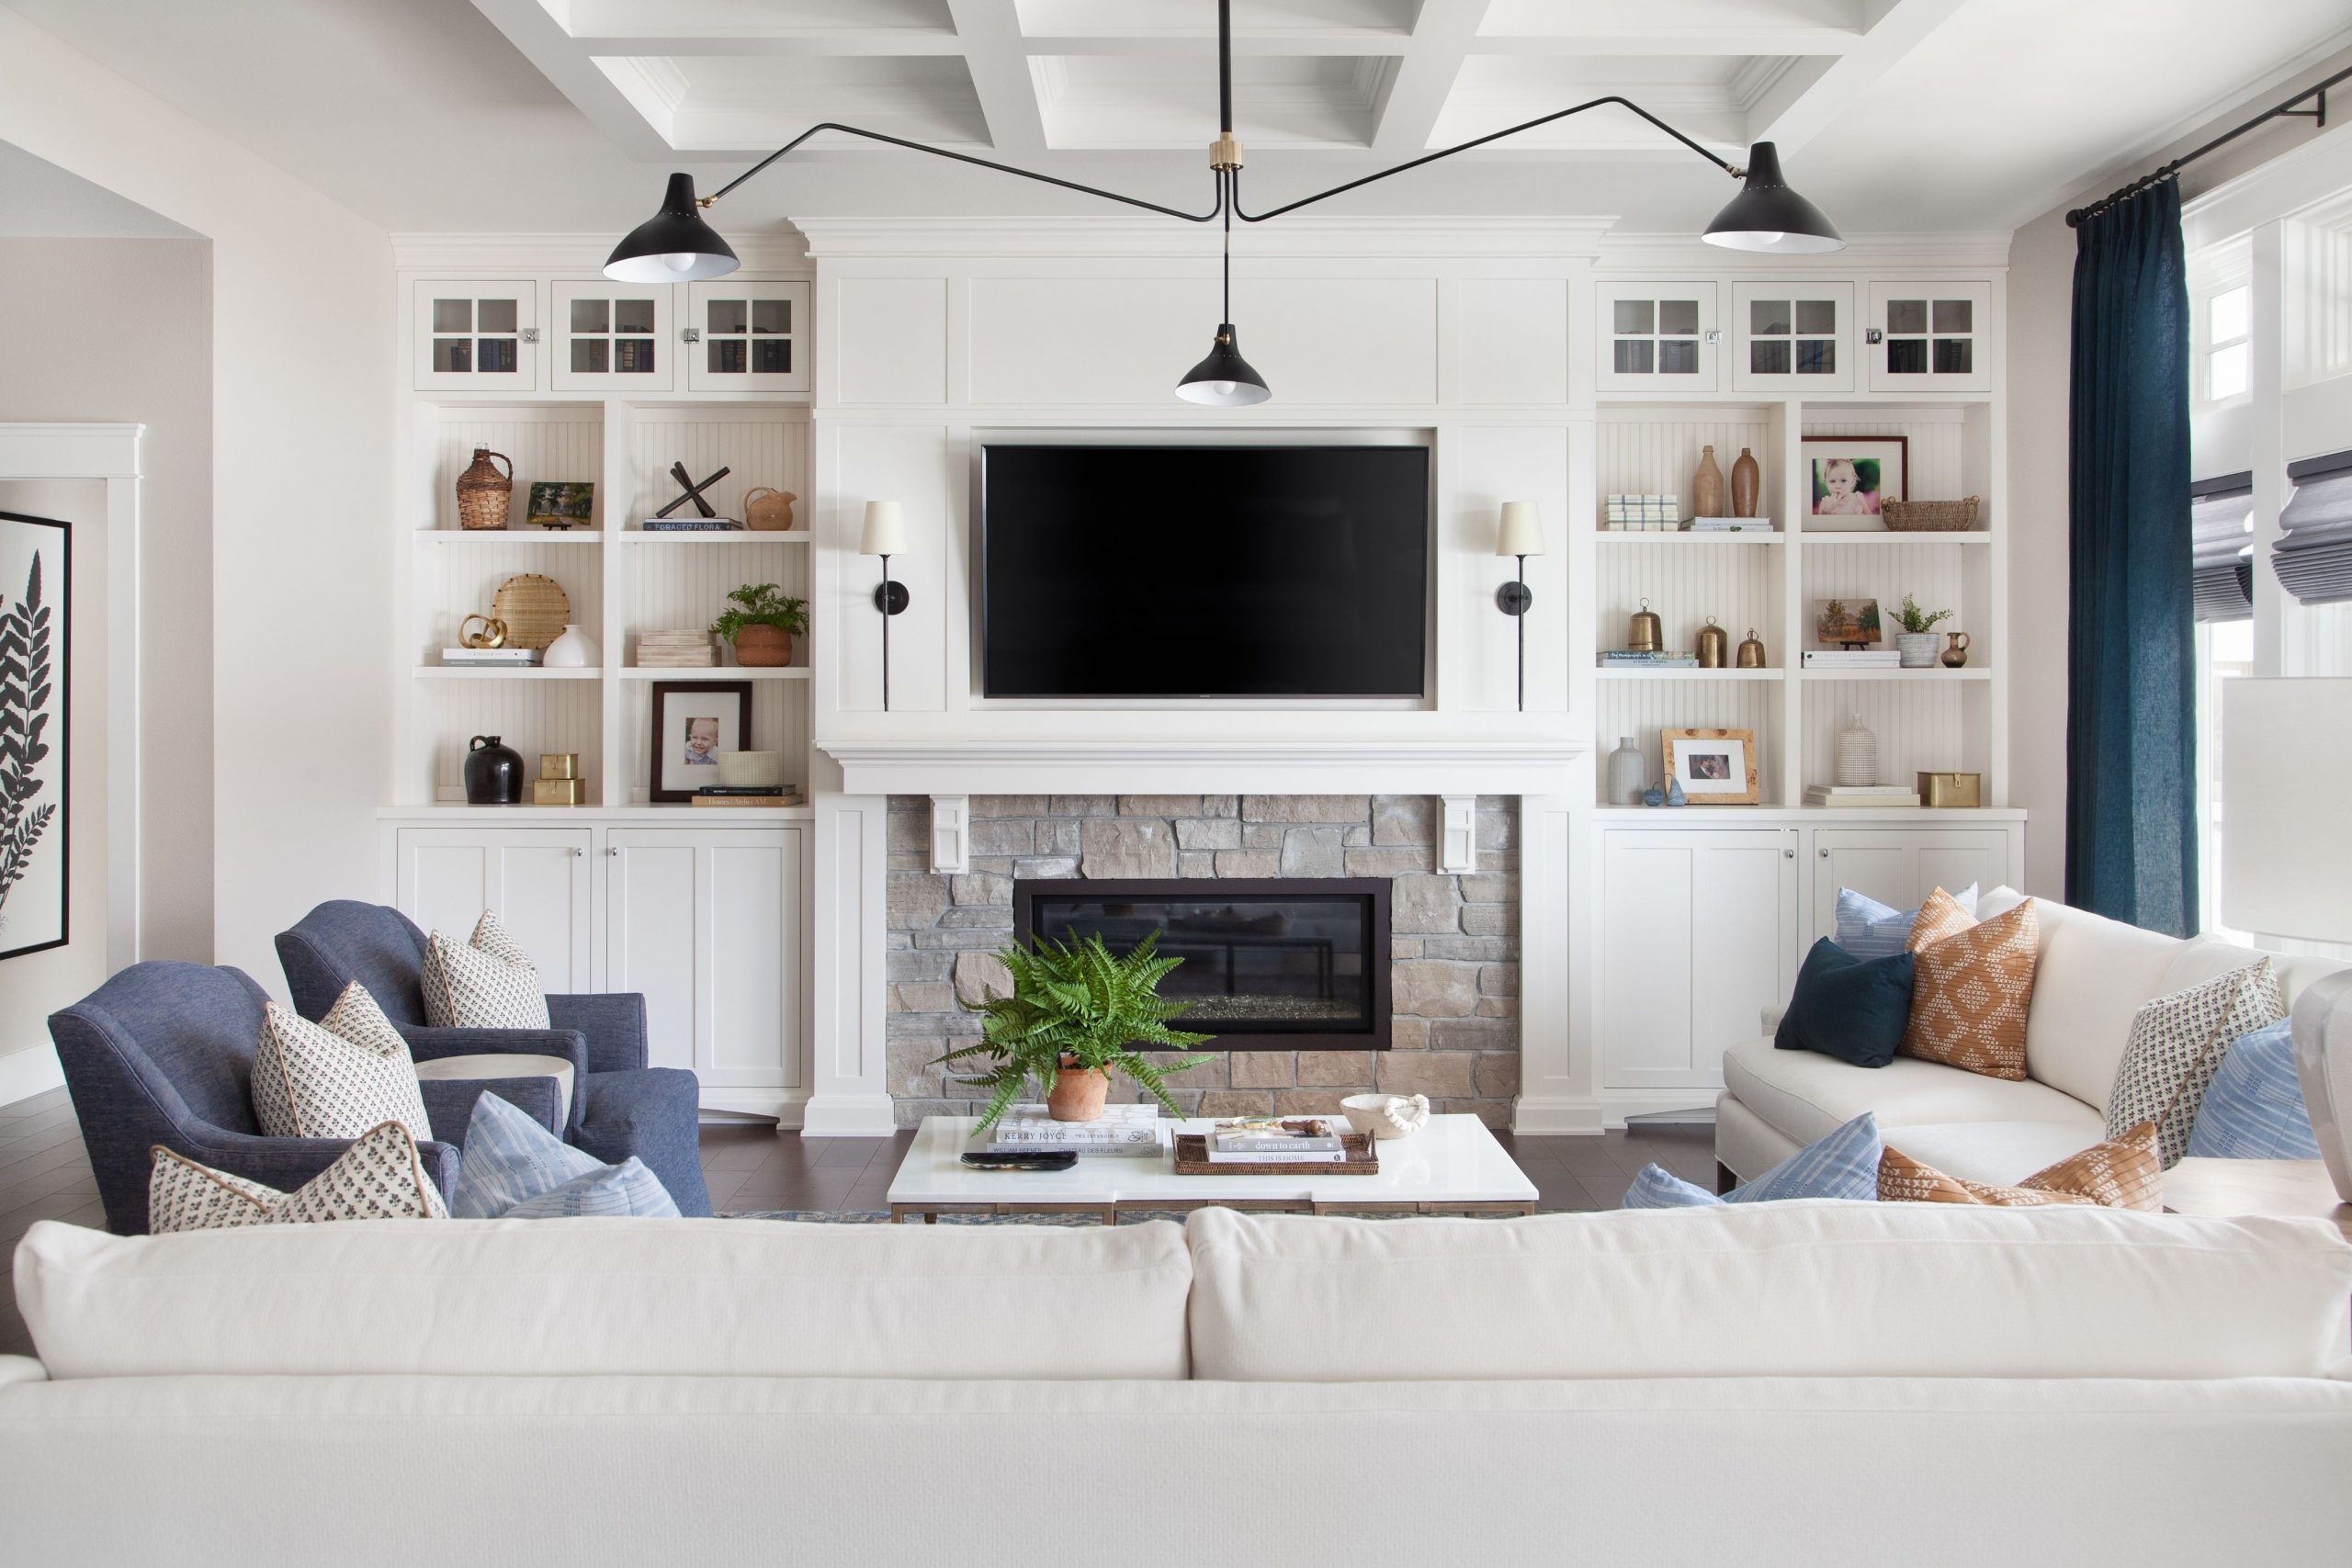 How to Style a Mantel with a Television